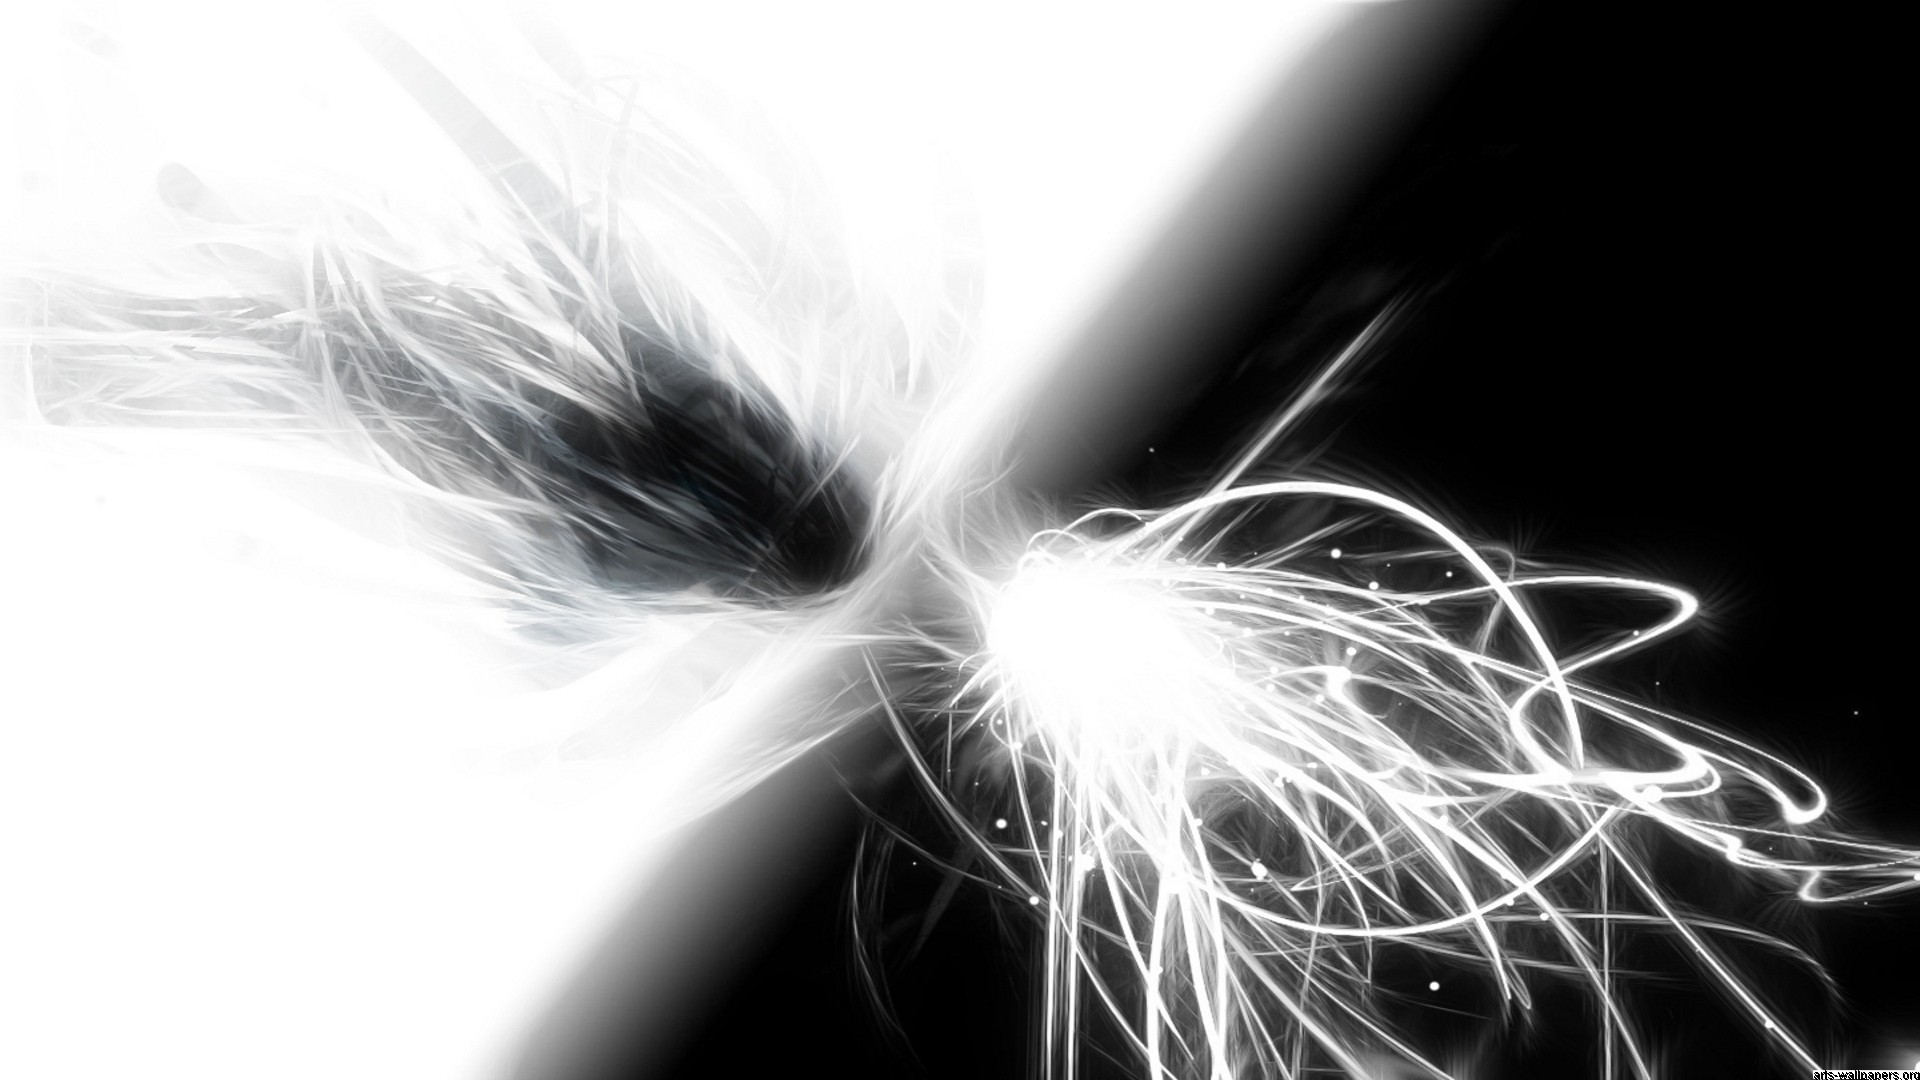 Black And White Abstract Drawings 2 Cool Hd Wallpaper. Black And White Abstract Drawings 2 Cool Hd Wallpaper